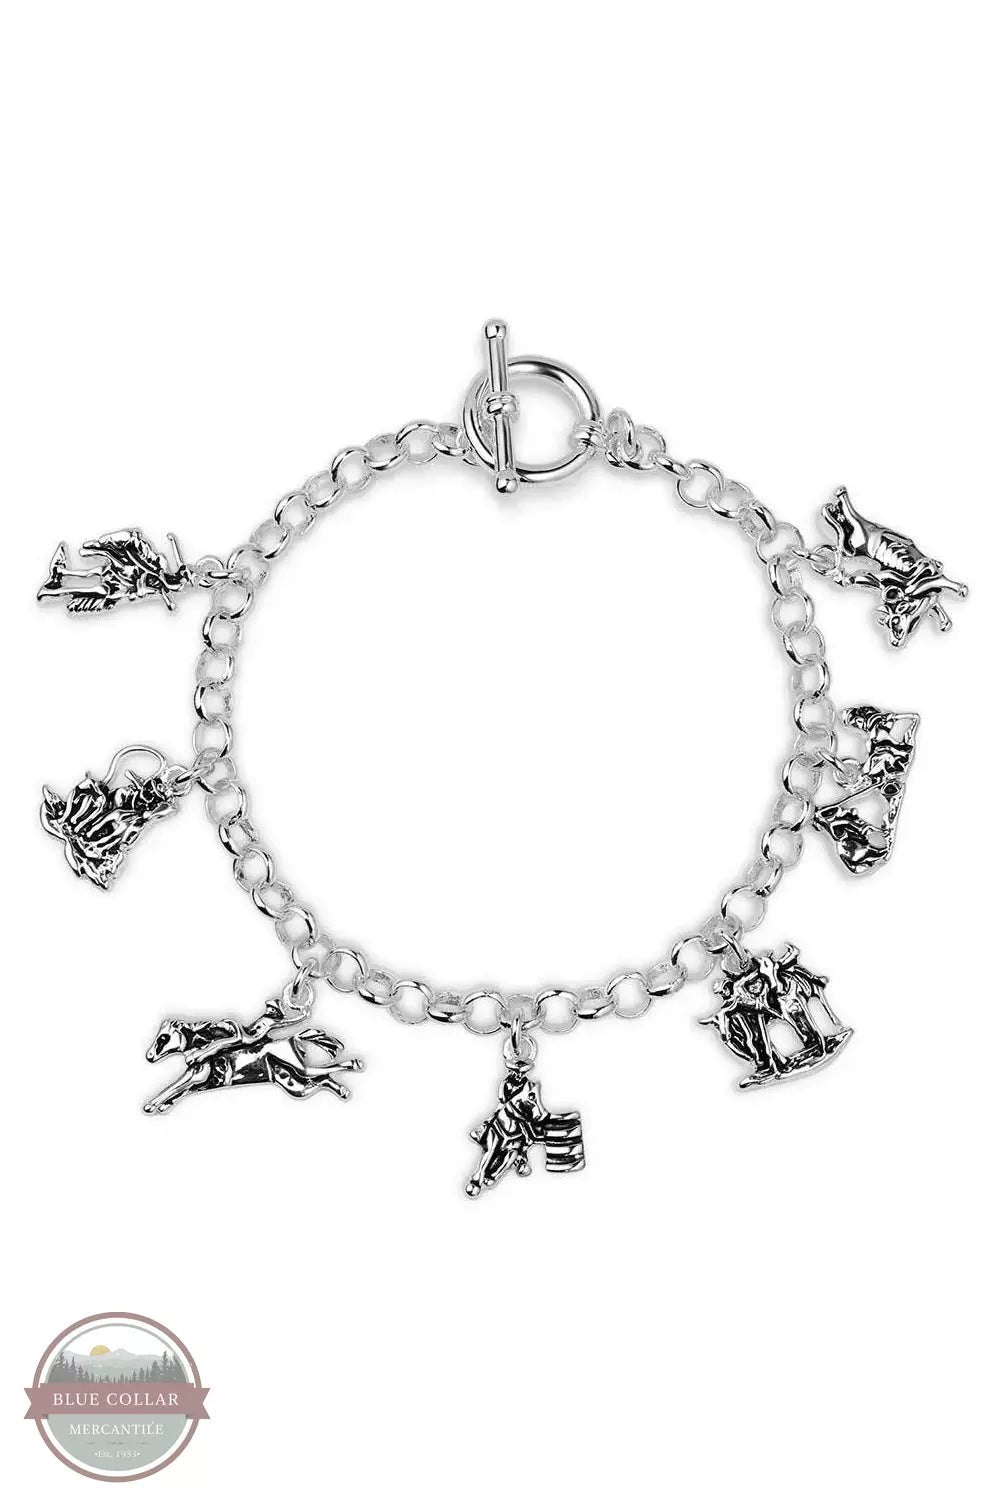 Montana Silversmiths BC5767 Charms of Champions Rodeo Bracelet Front View